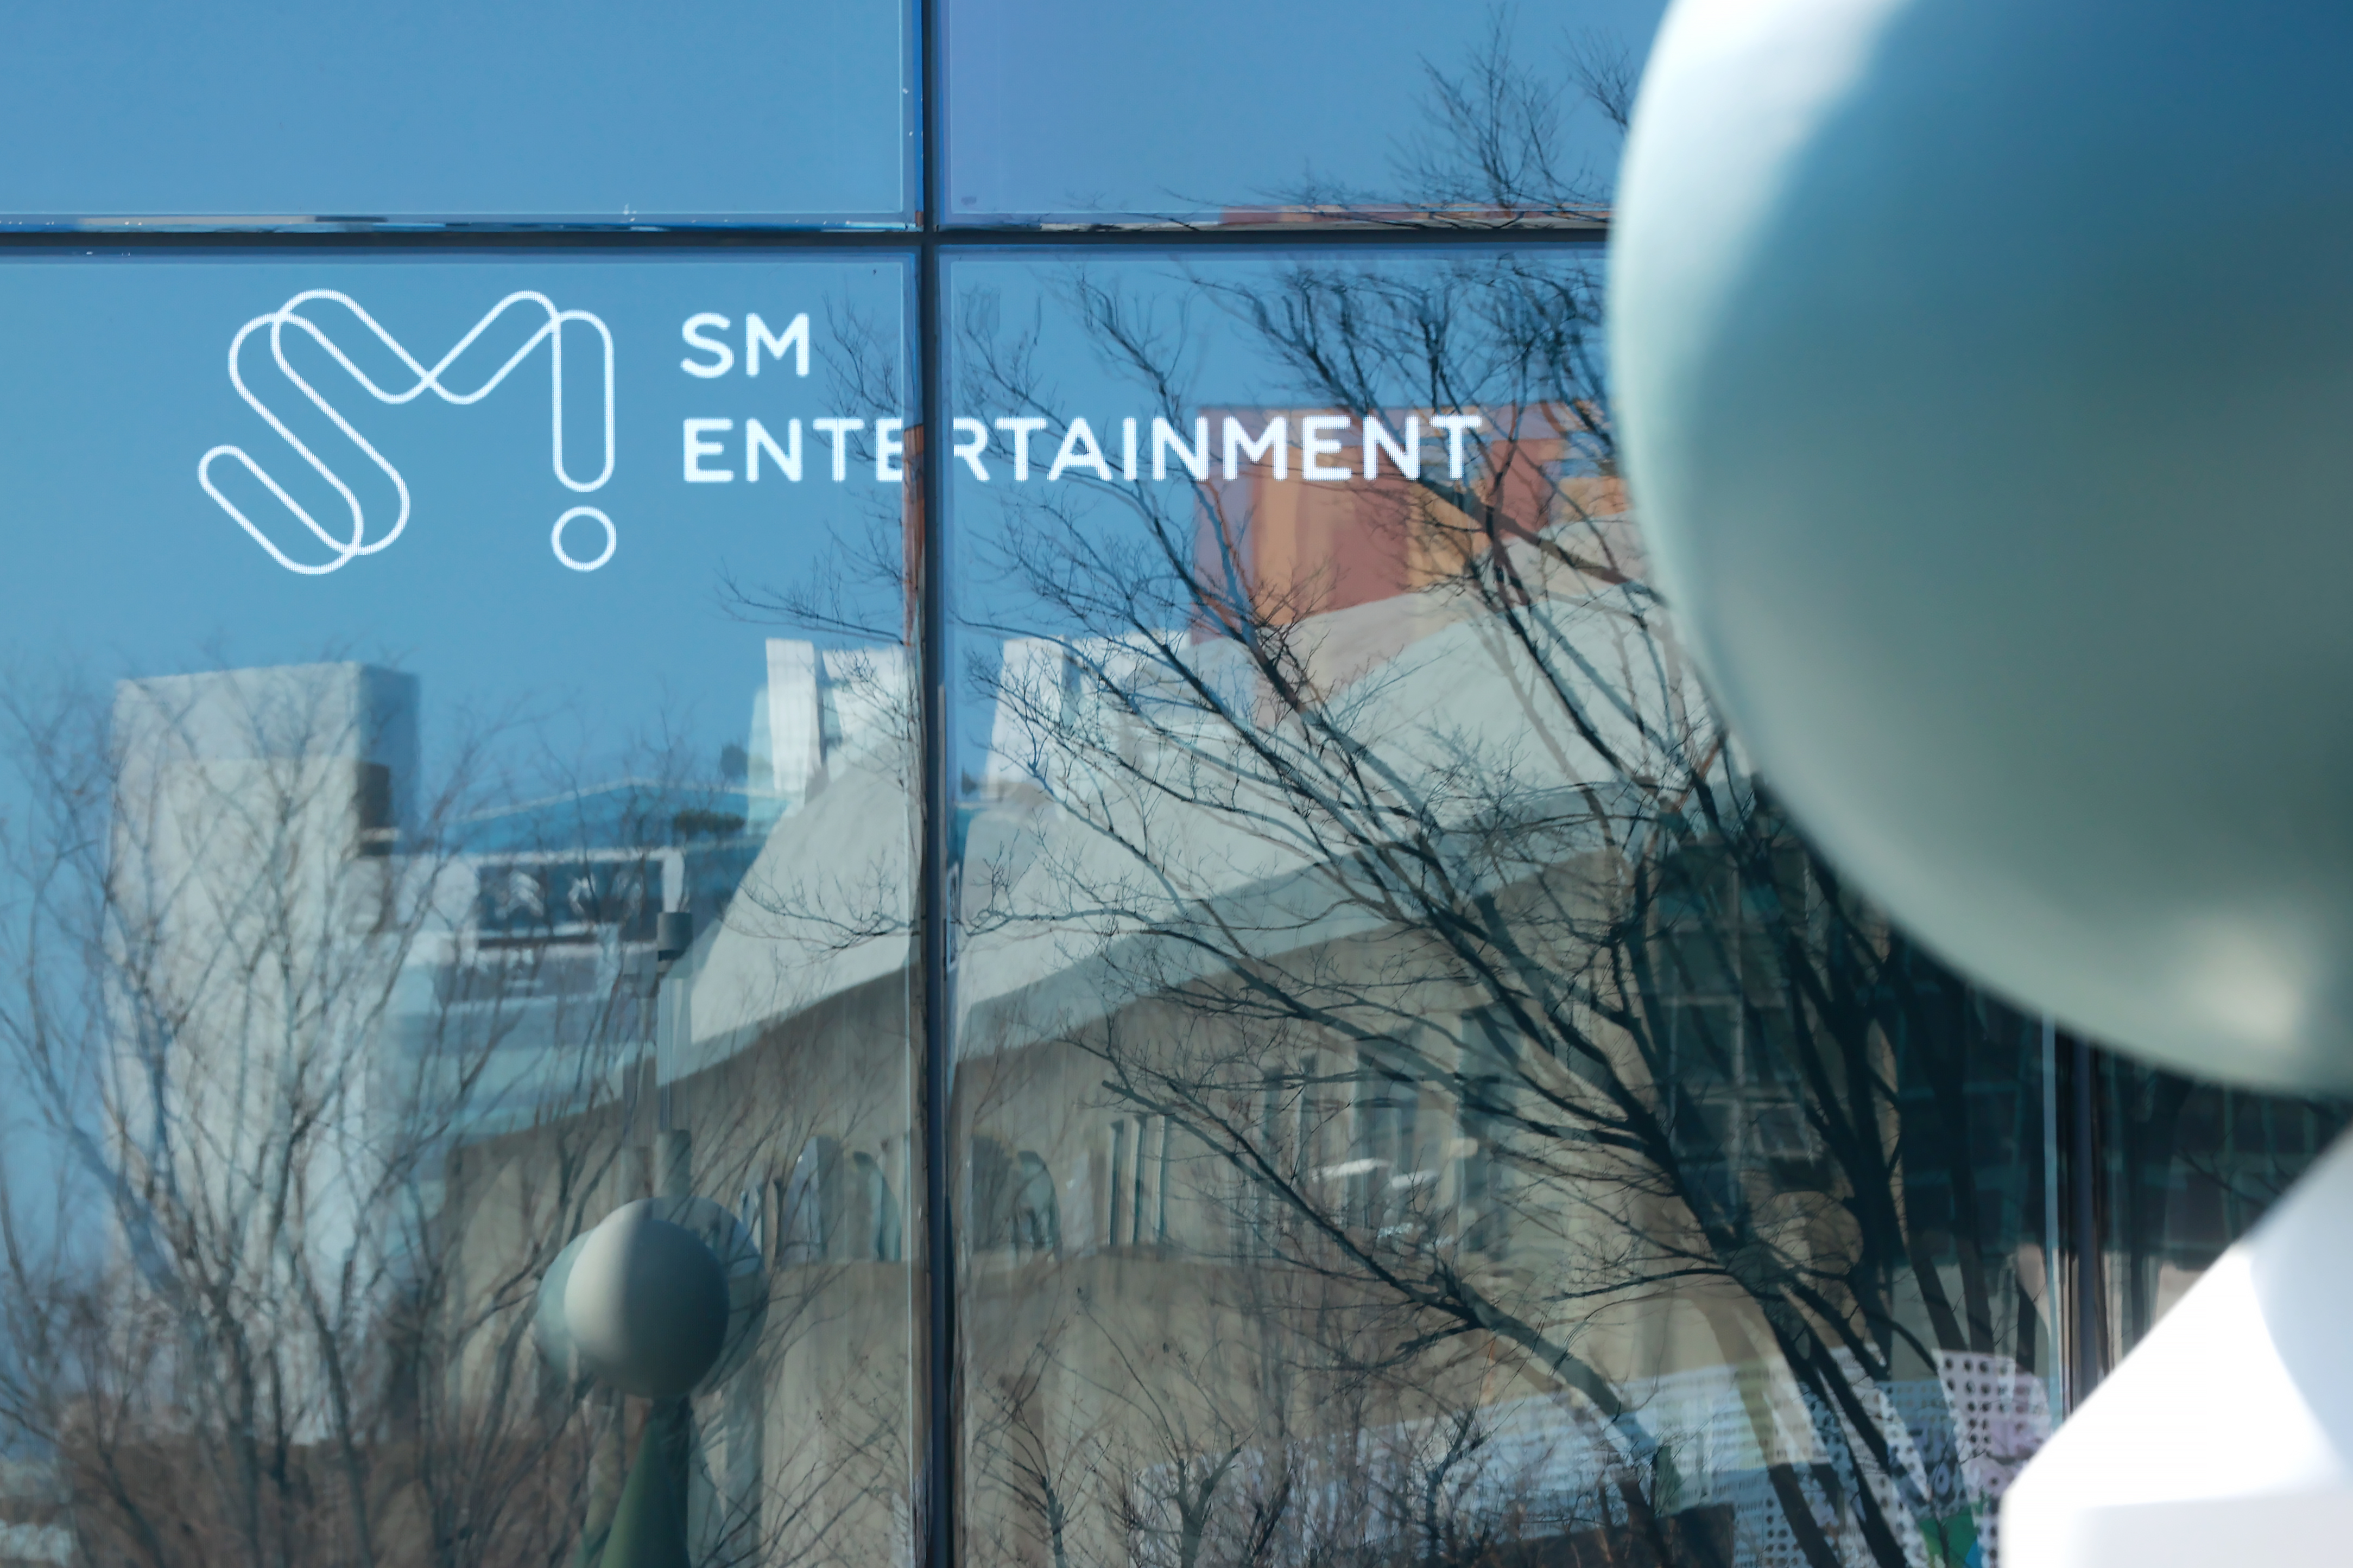 Kakao wins control of SM Entertainment, one of South Korea's most iconic  music agencies